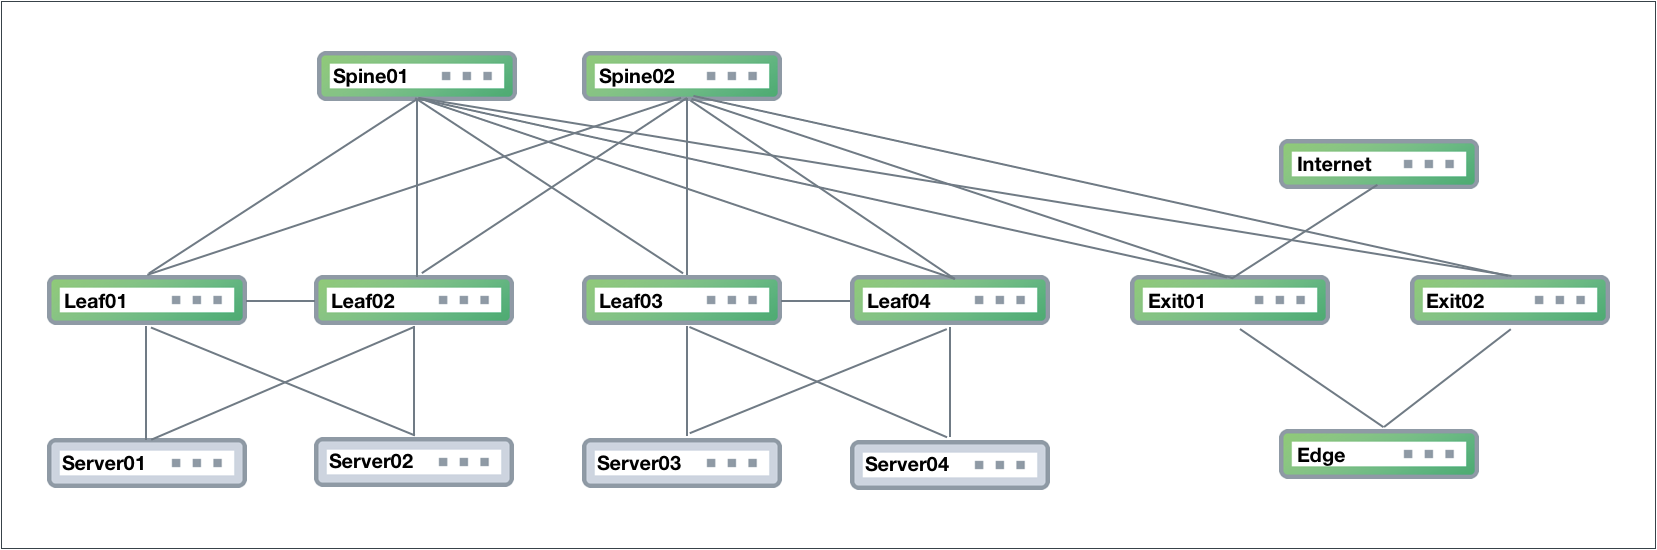 diagram of a Clos network displaying connections between spine switches, leafs, servers, and exit switches.